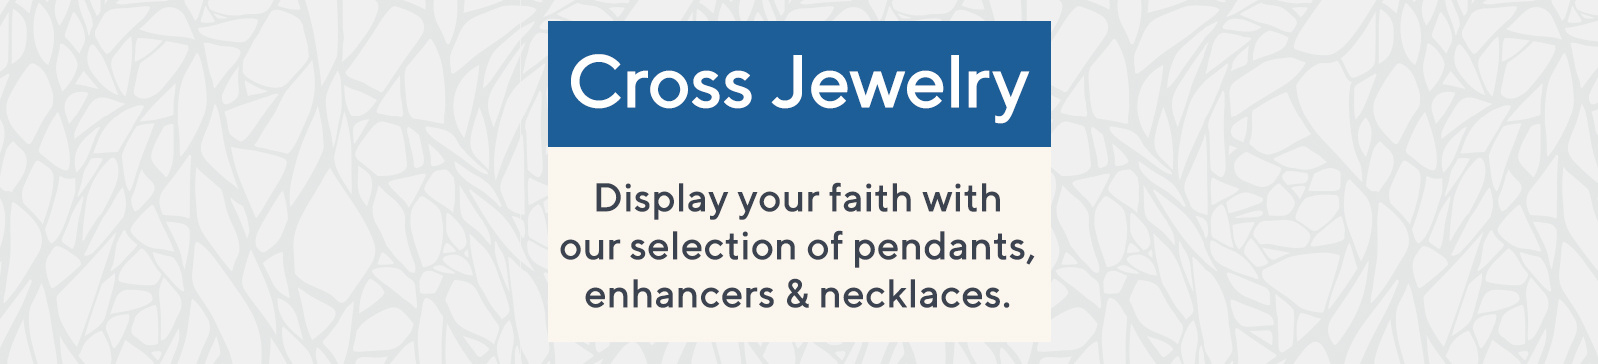 Cross Jewelry - Display your faith with our selection of pendants, enhancers & necklaces.